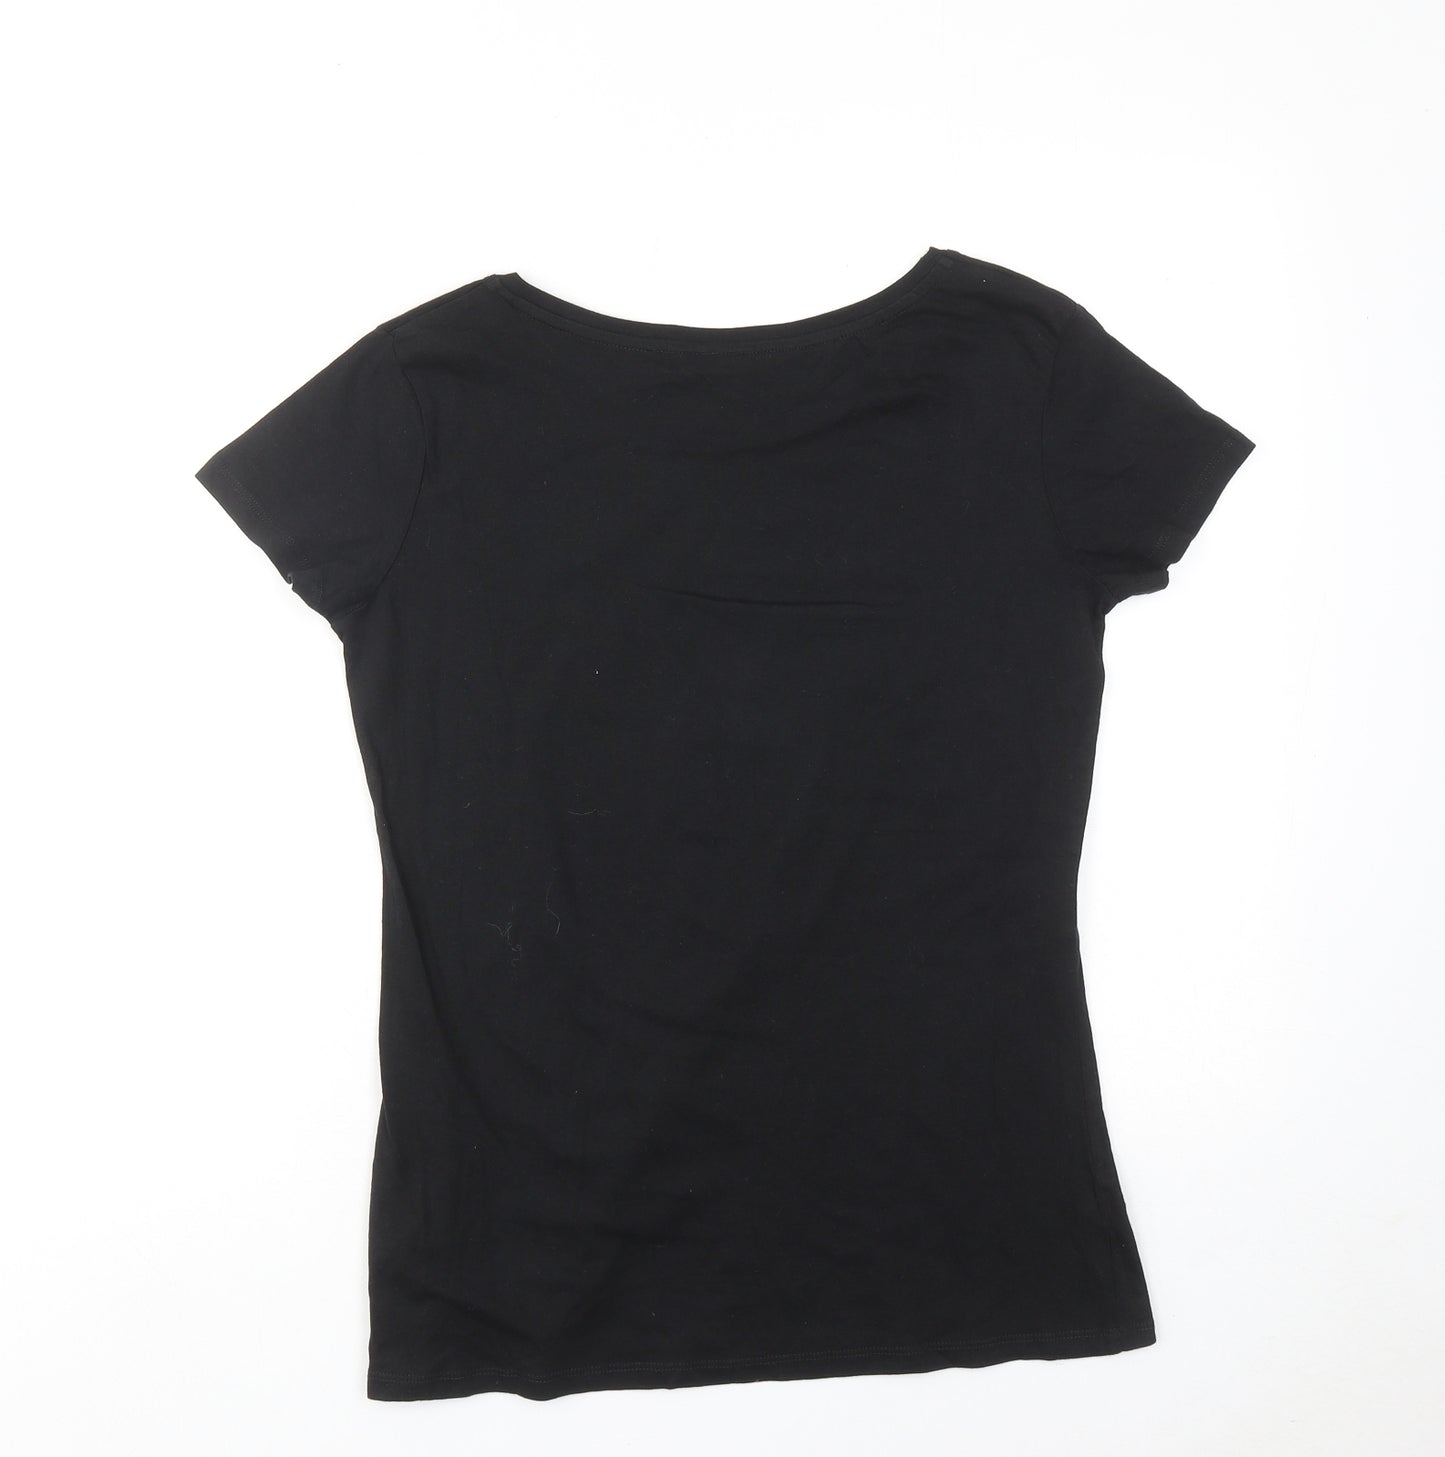 Last Exit to Nowhere Womens Black Cotton Basic T-Shirt Size S Round Neck - Chester Copperpot